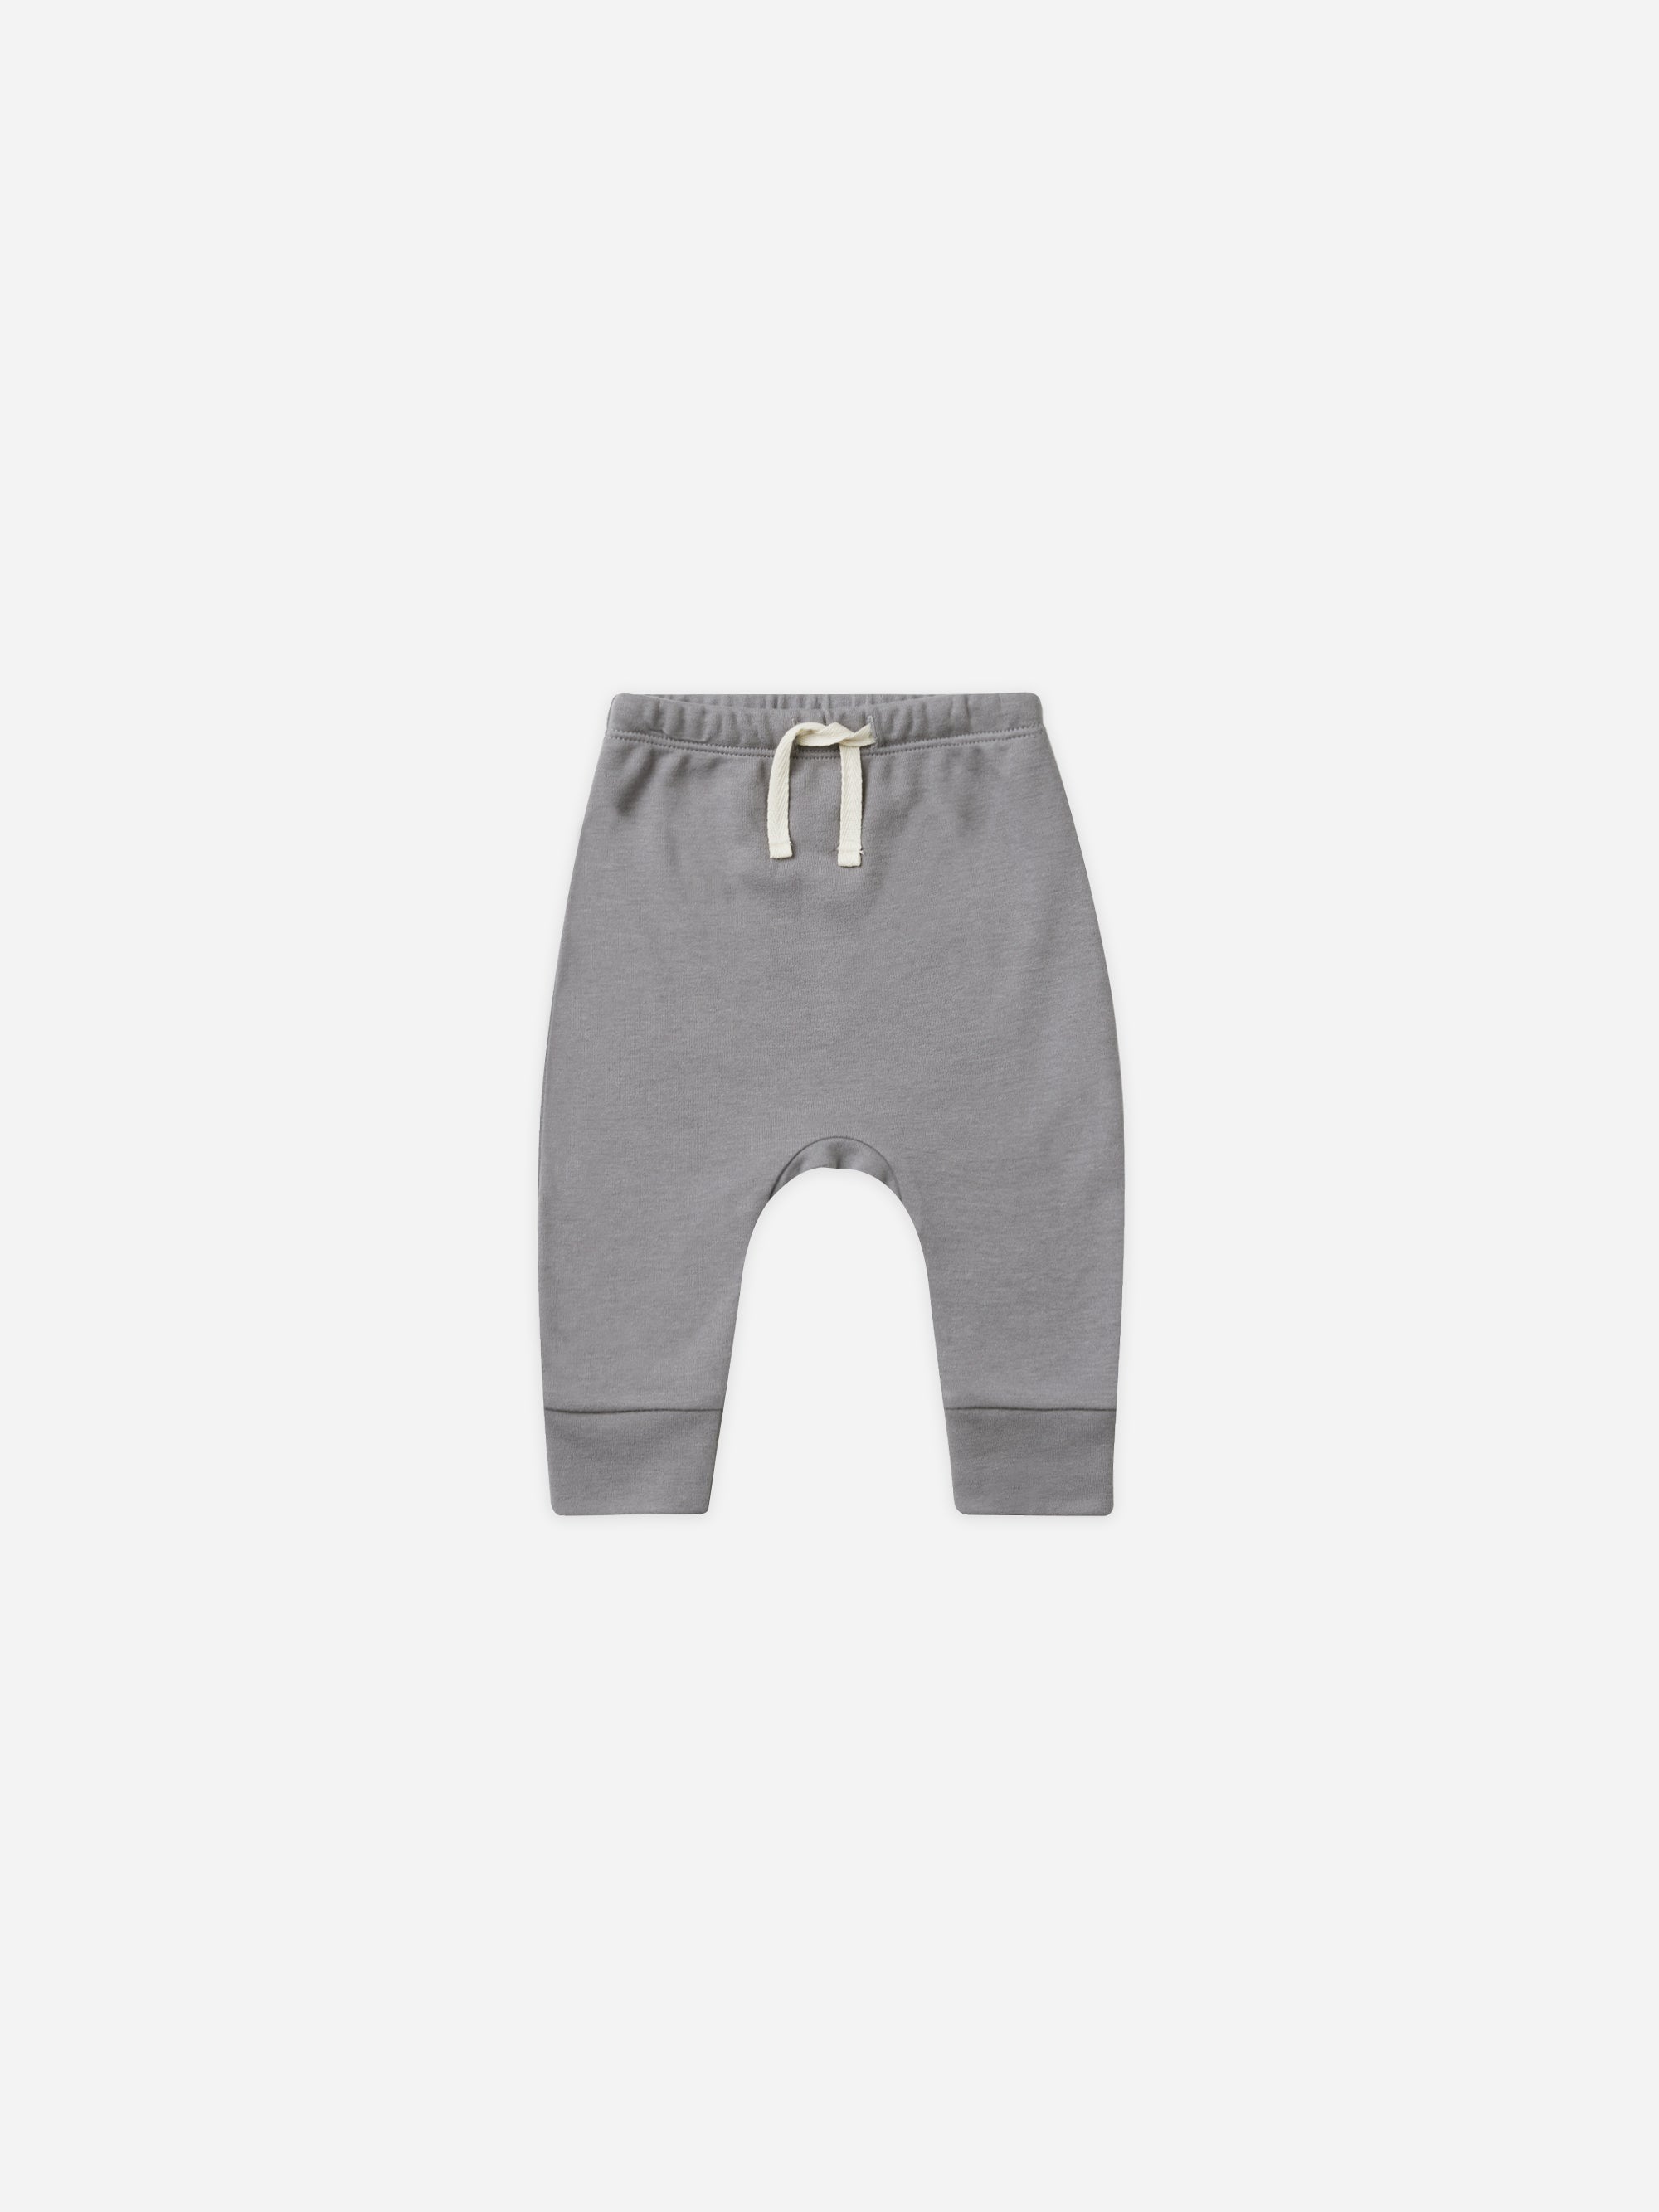 Drawstring Pant || Lagoon - Rylee + Cru | Kids Clothes | Trendy Baby Clothes | Modern Infant Outfits |